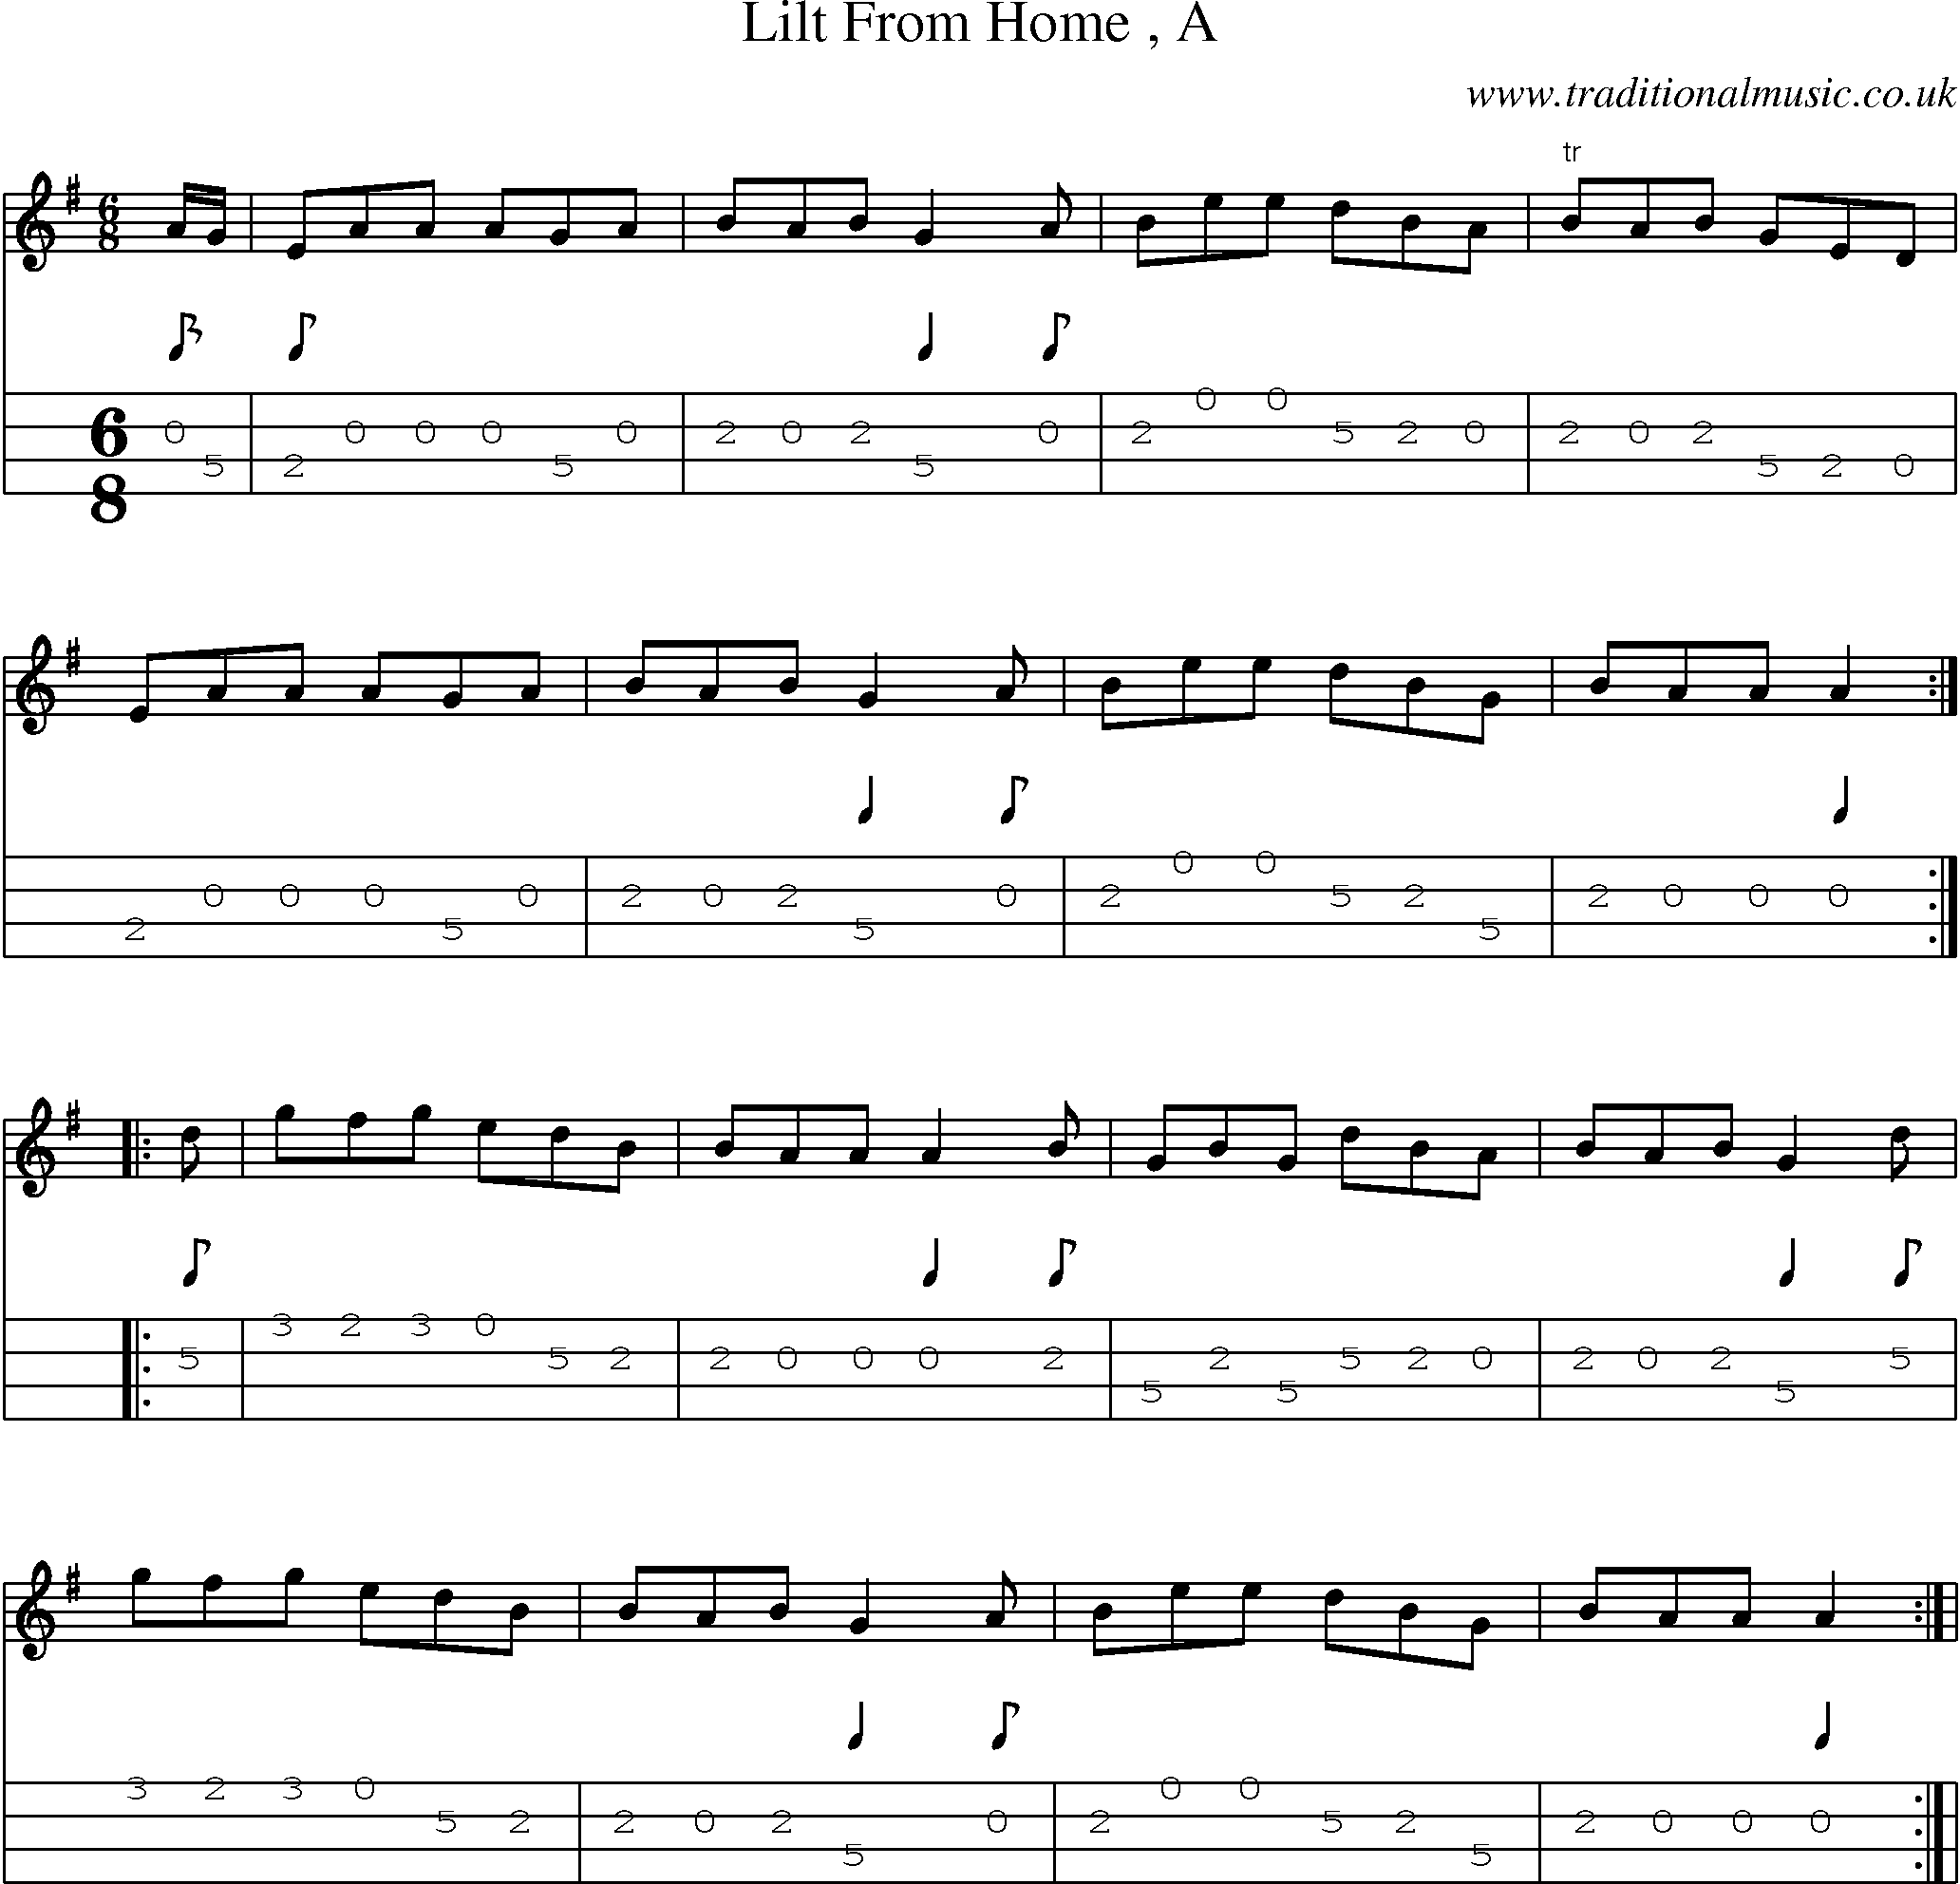 Music Score and Mandolin Tabs for Lilt From Home A